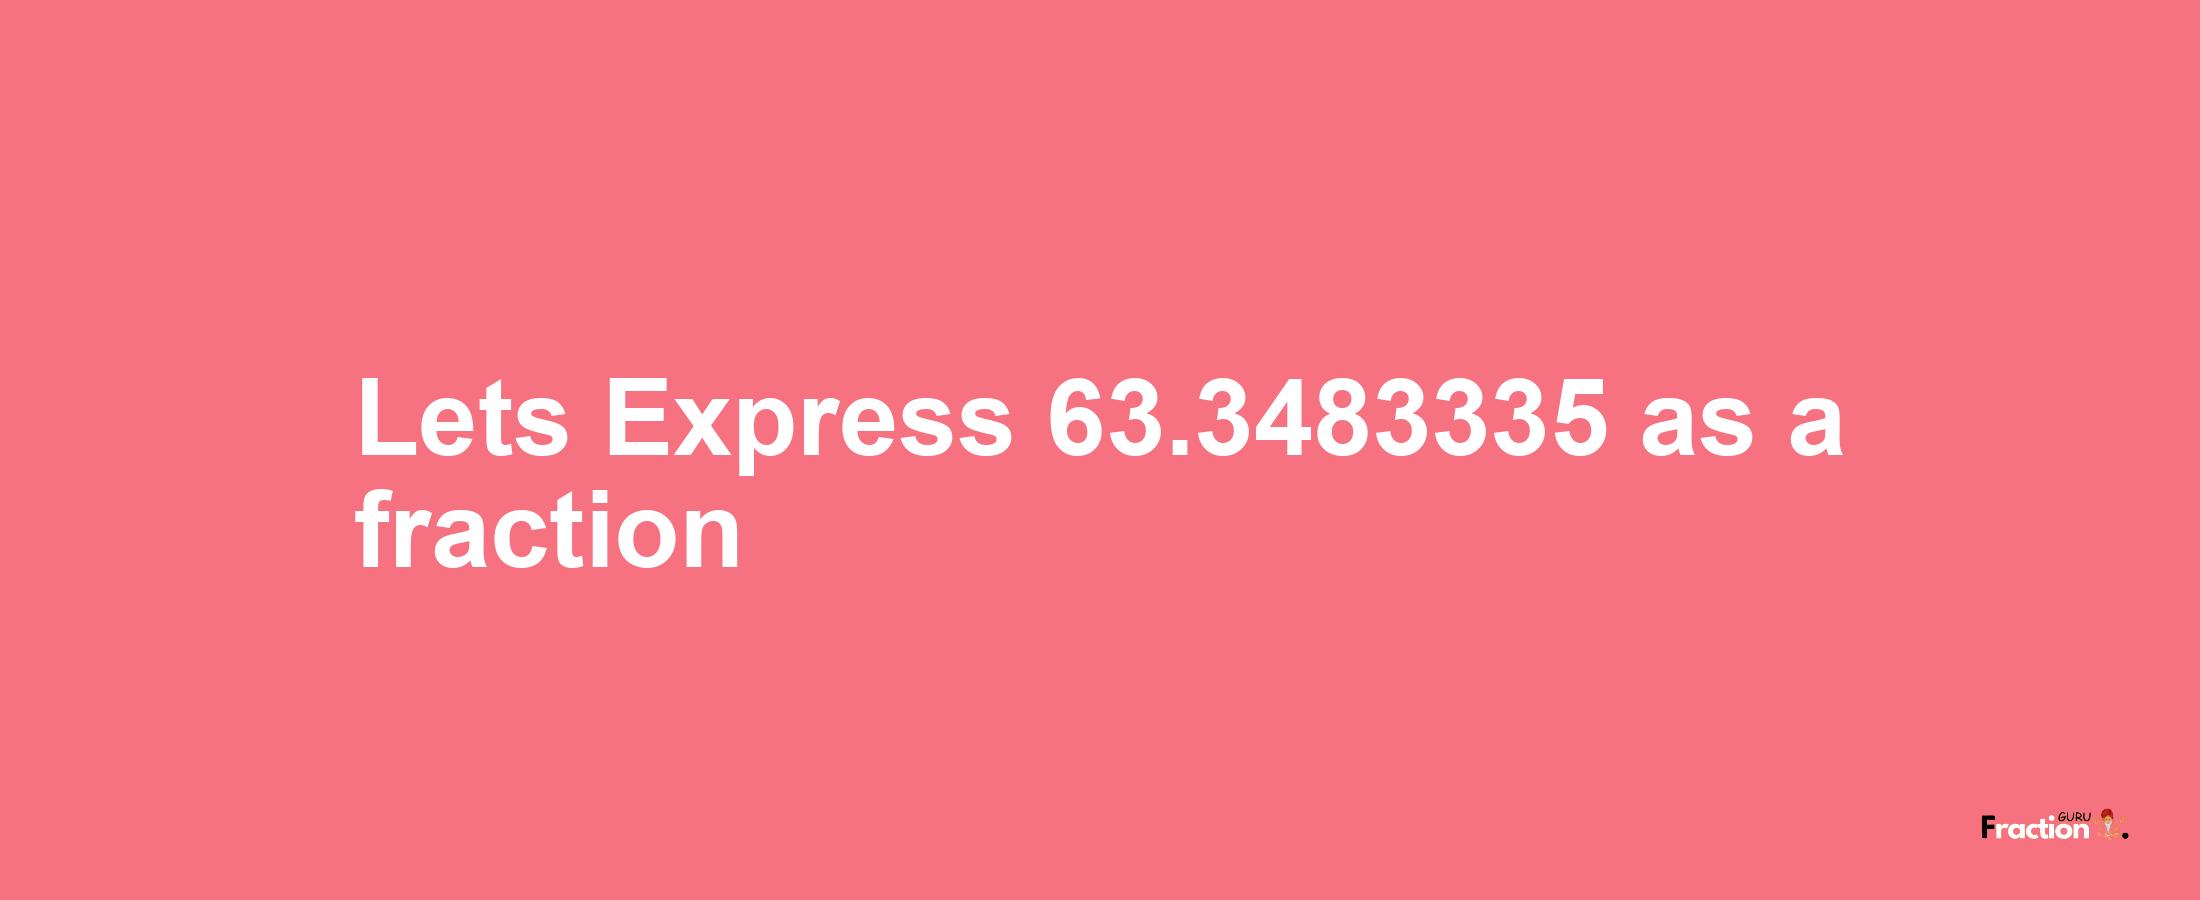 Lets Express 63.3483335 as afraction